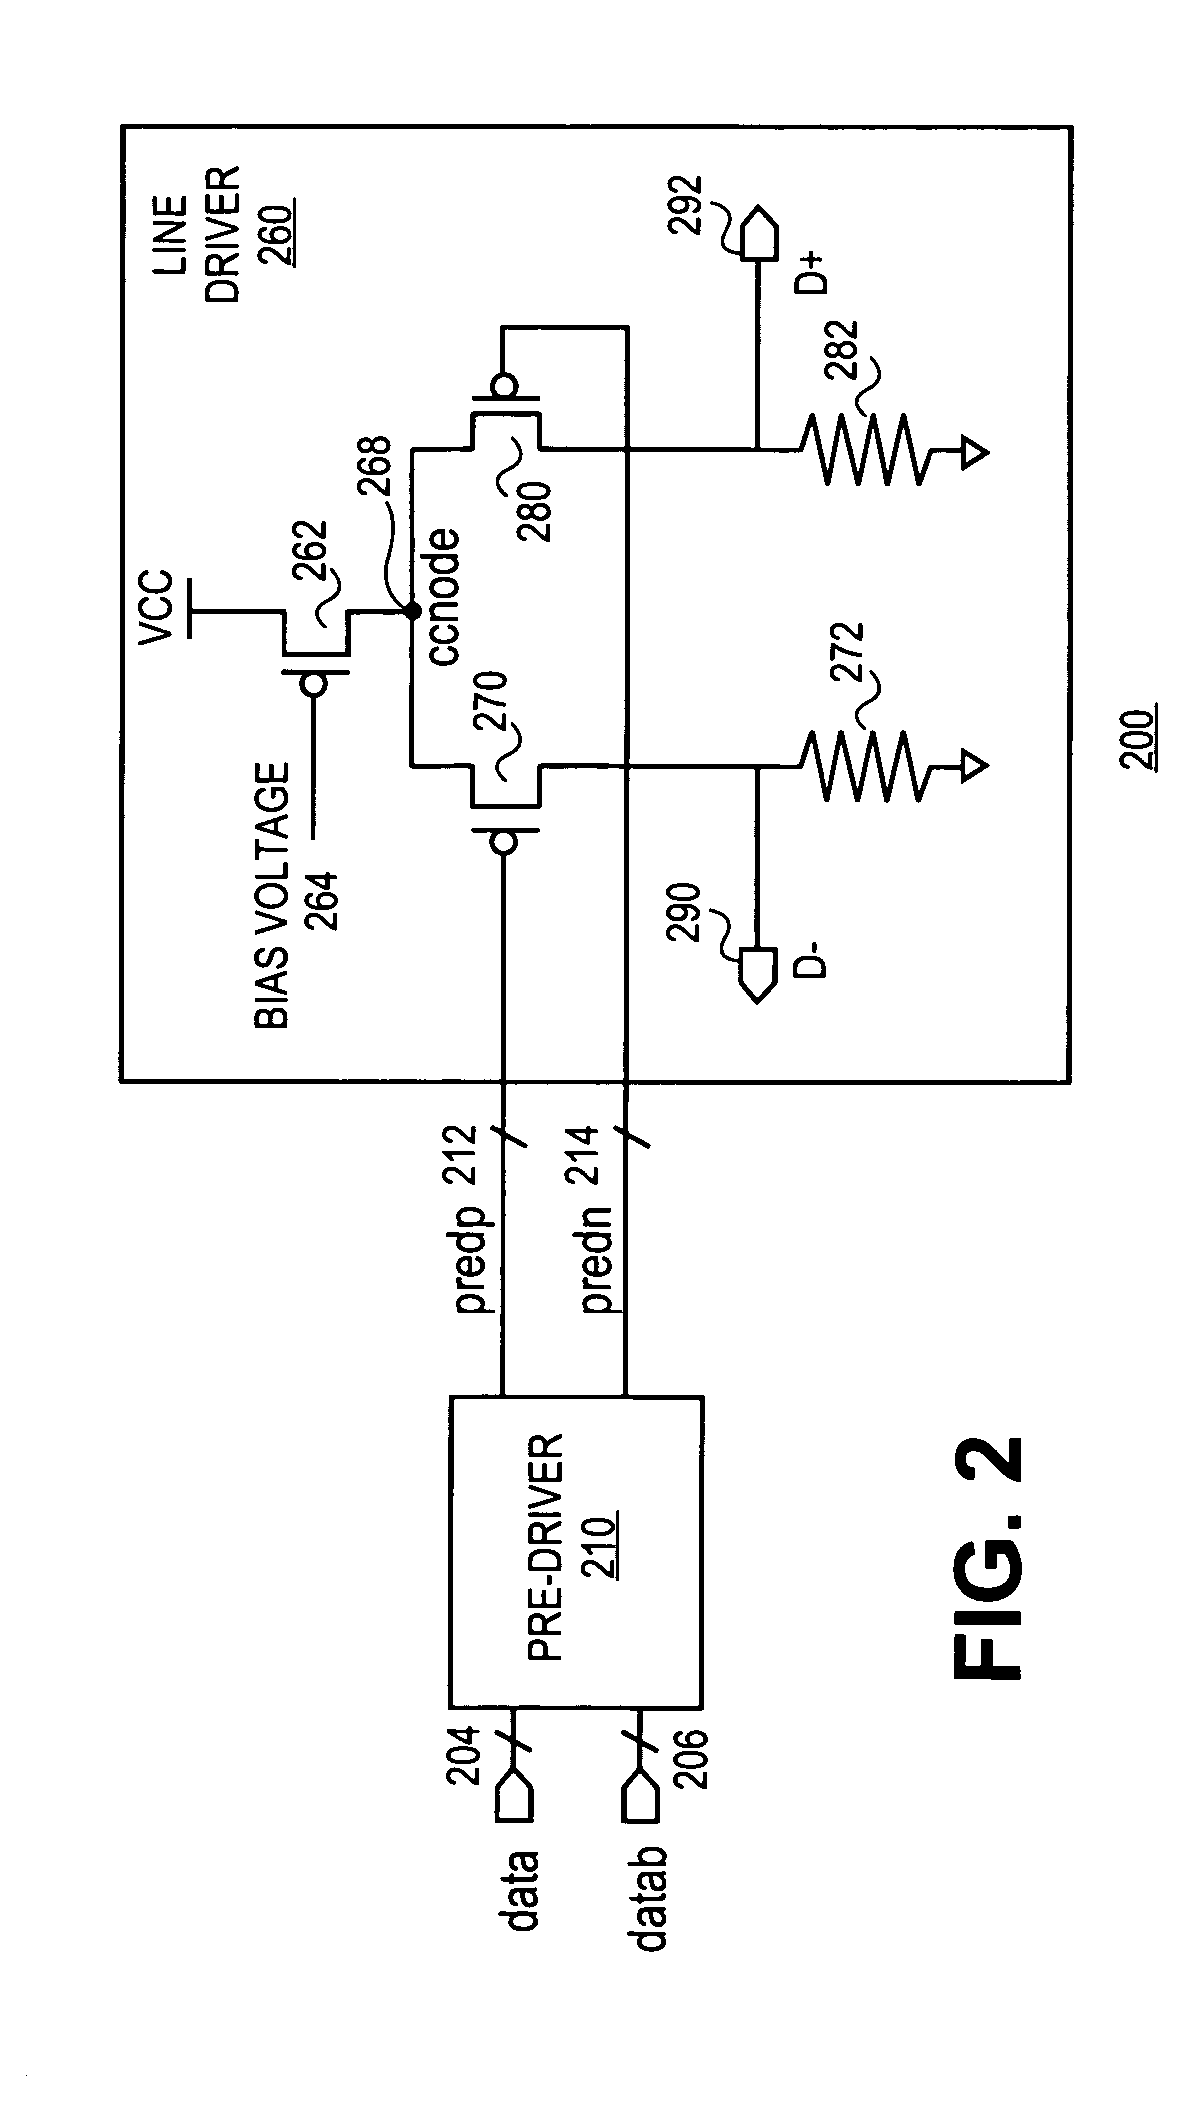 Apparatus and method for a low jitter predriver for differential output drivers